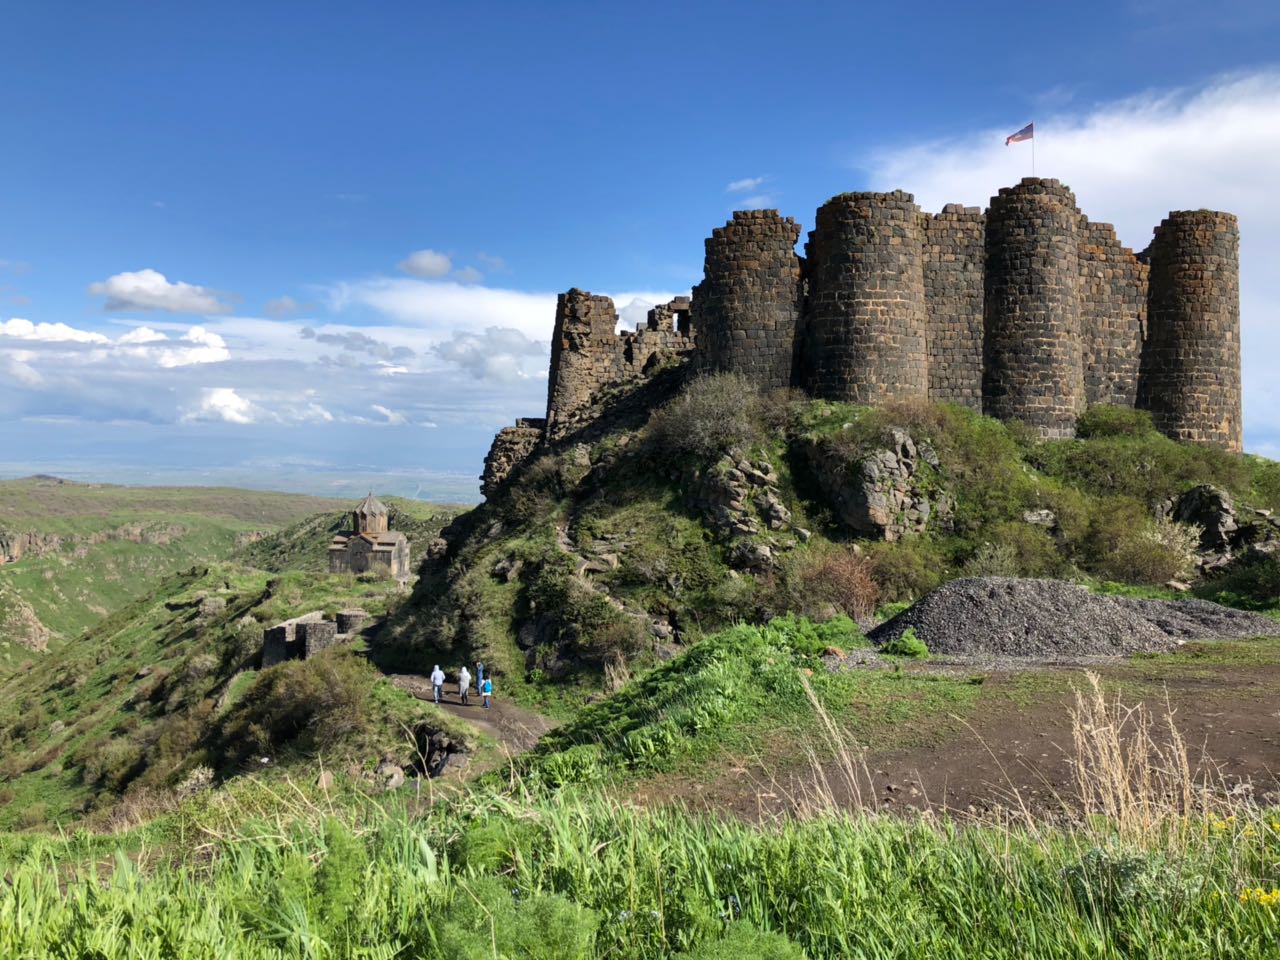 A view of the spectacular Amberd Fortress